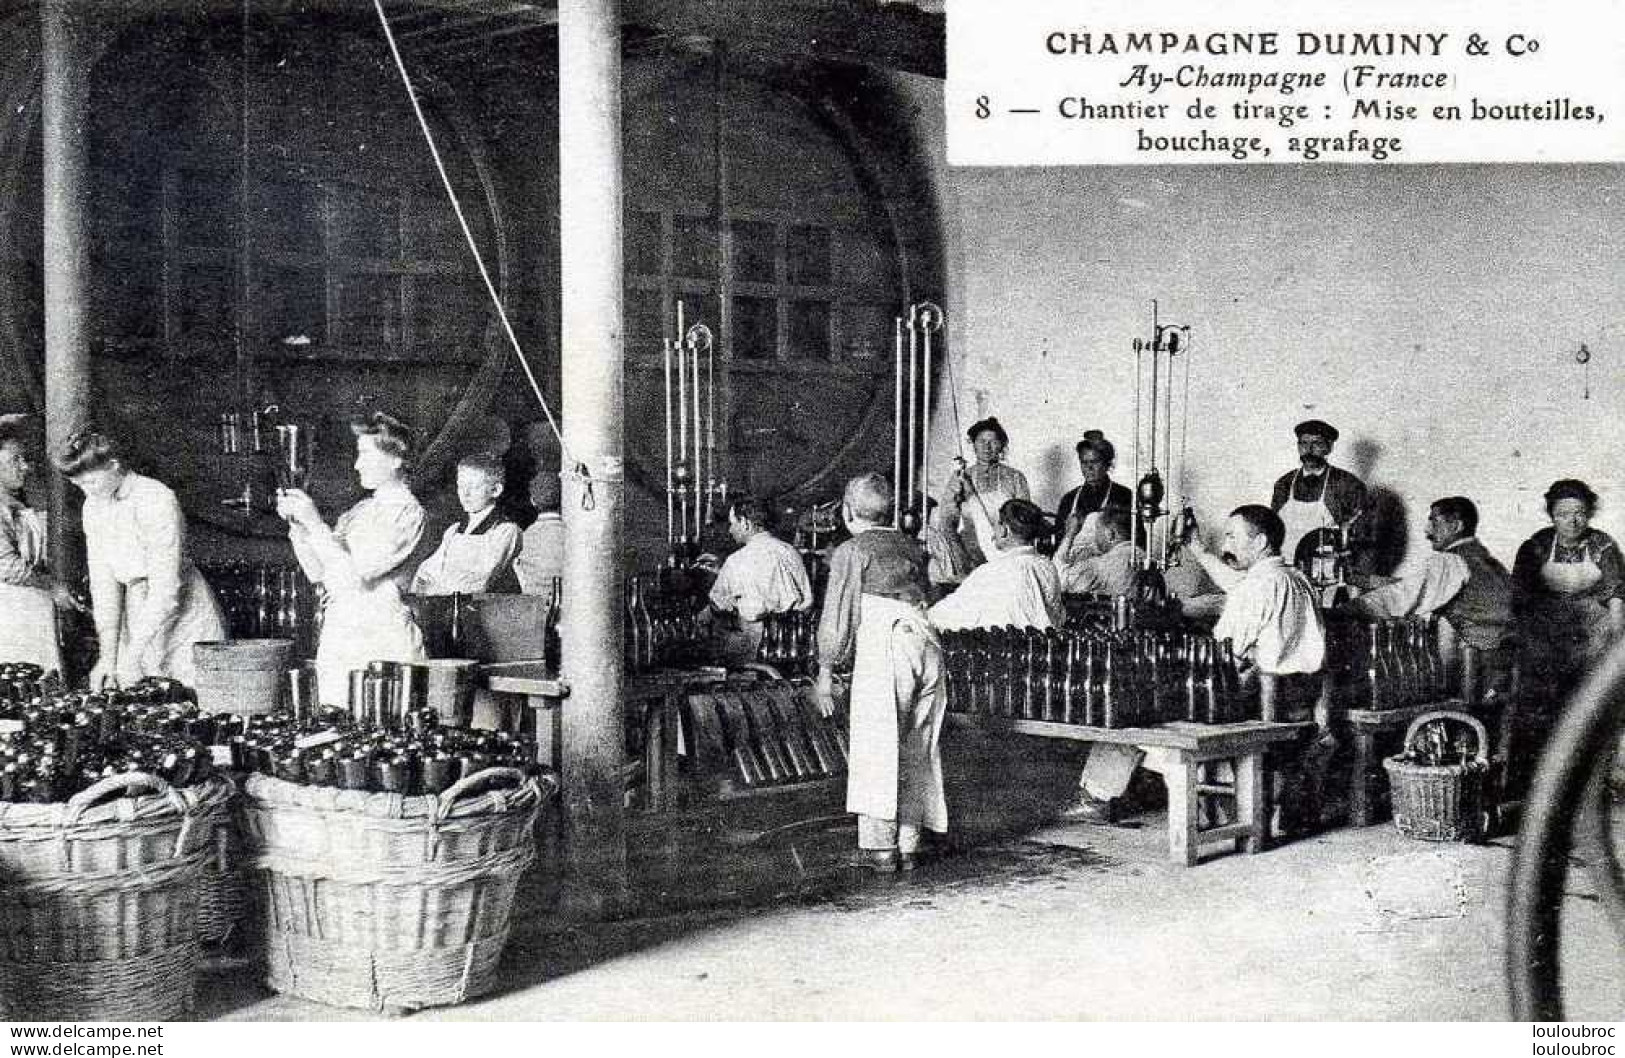 51 CHAMPAGNE DUMINY AY CHANTIER DE TIRAGE MISE EN BOUTEILLES BOUCHAGE AGRAFAGE - Weinberge